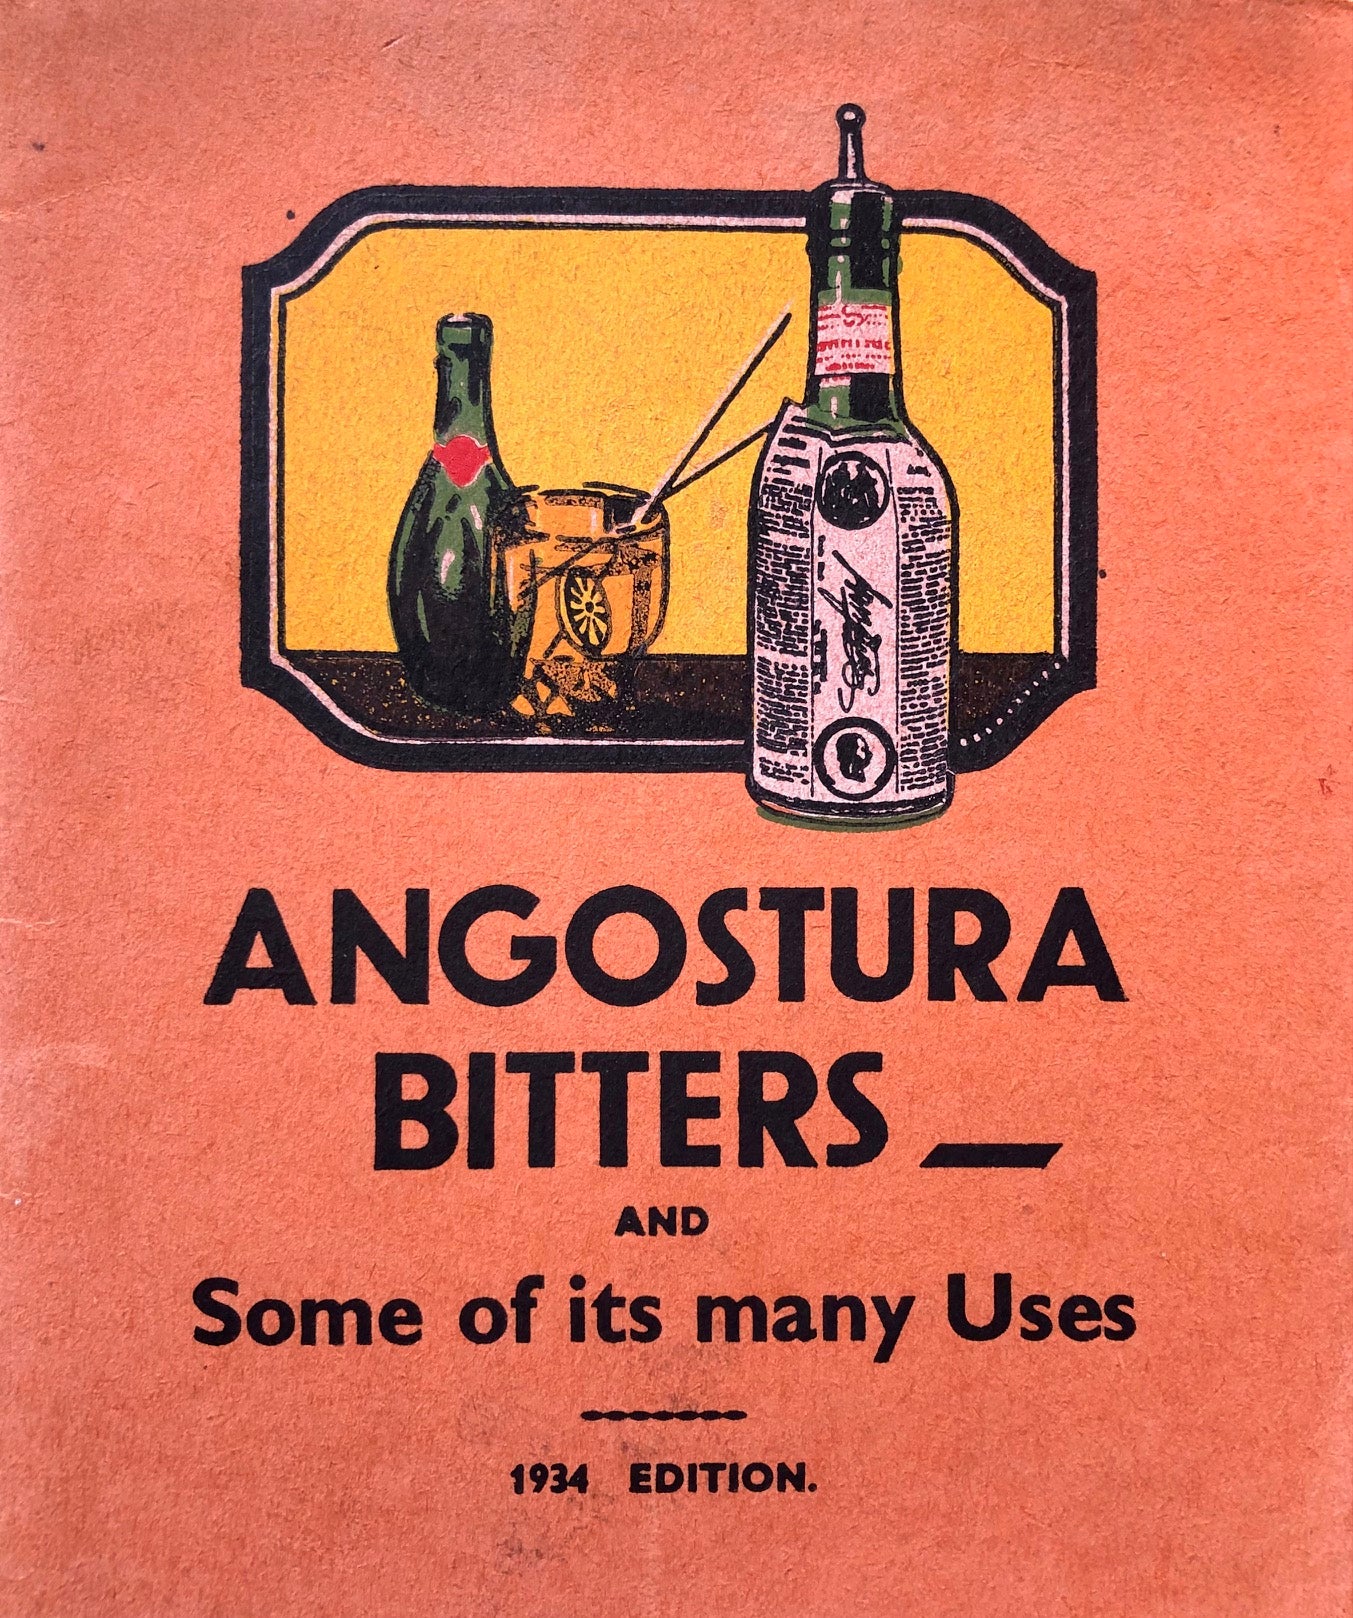 (Bitters) Angostura Bitters and Some of its Many Uses.